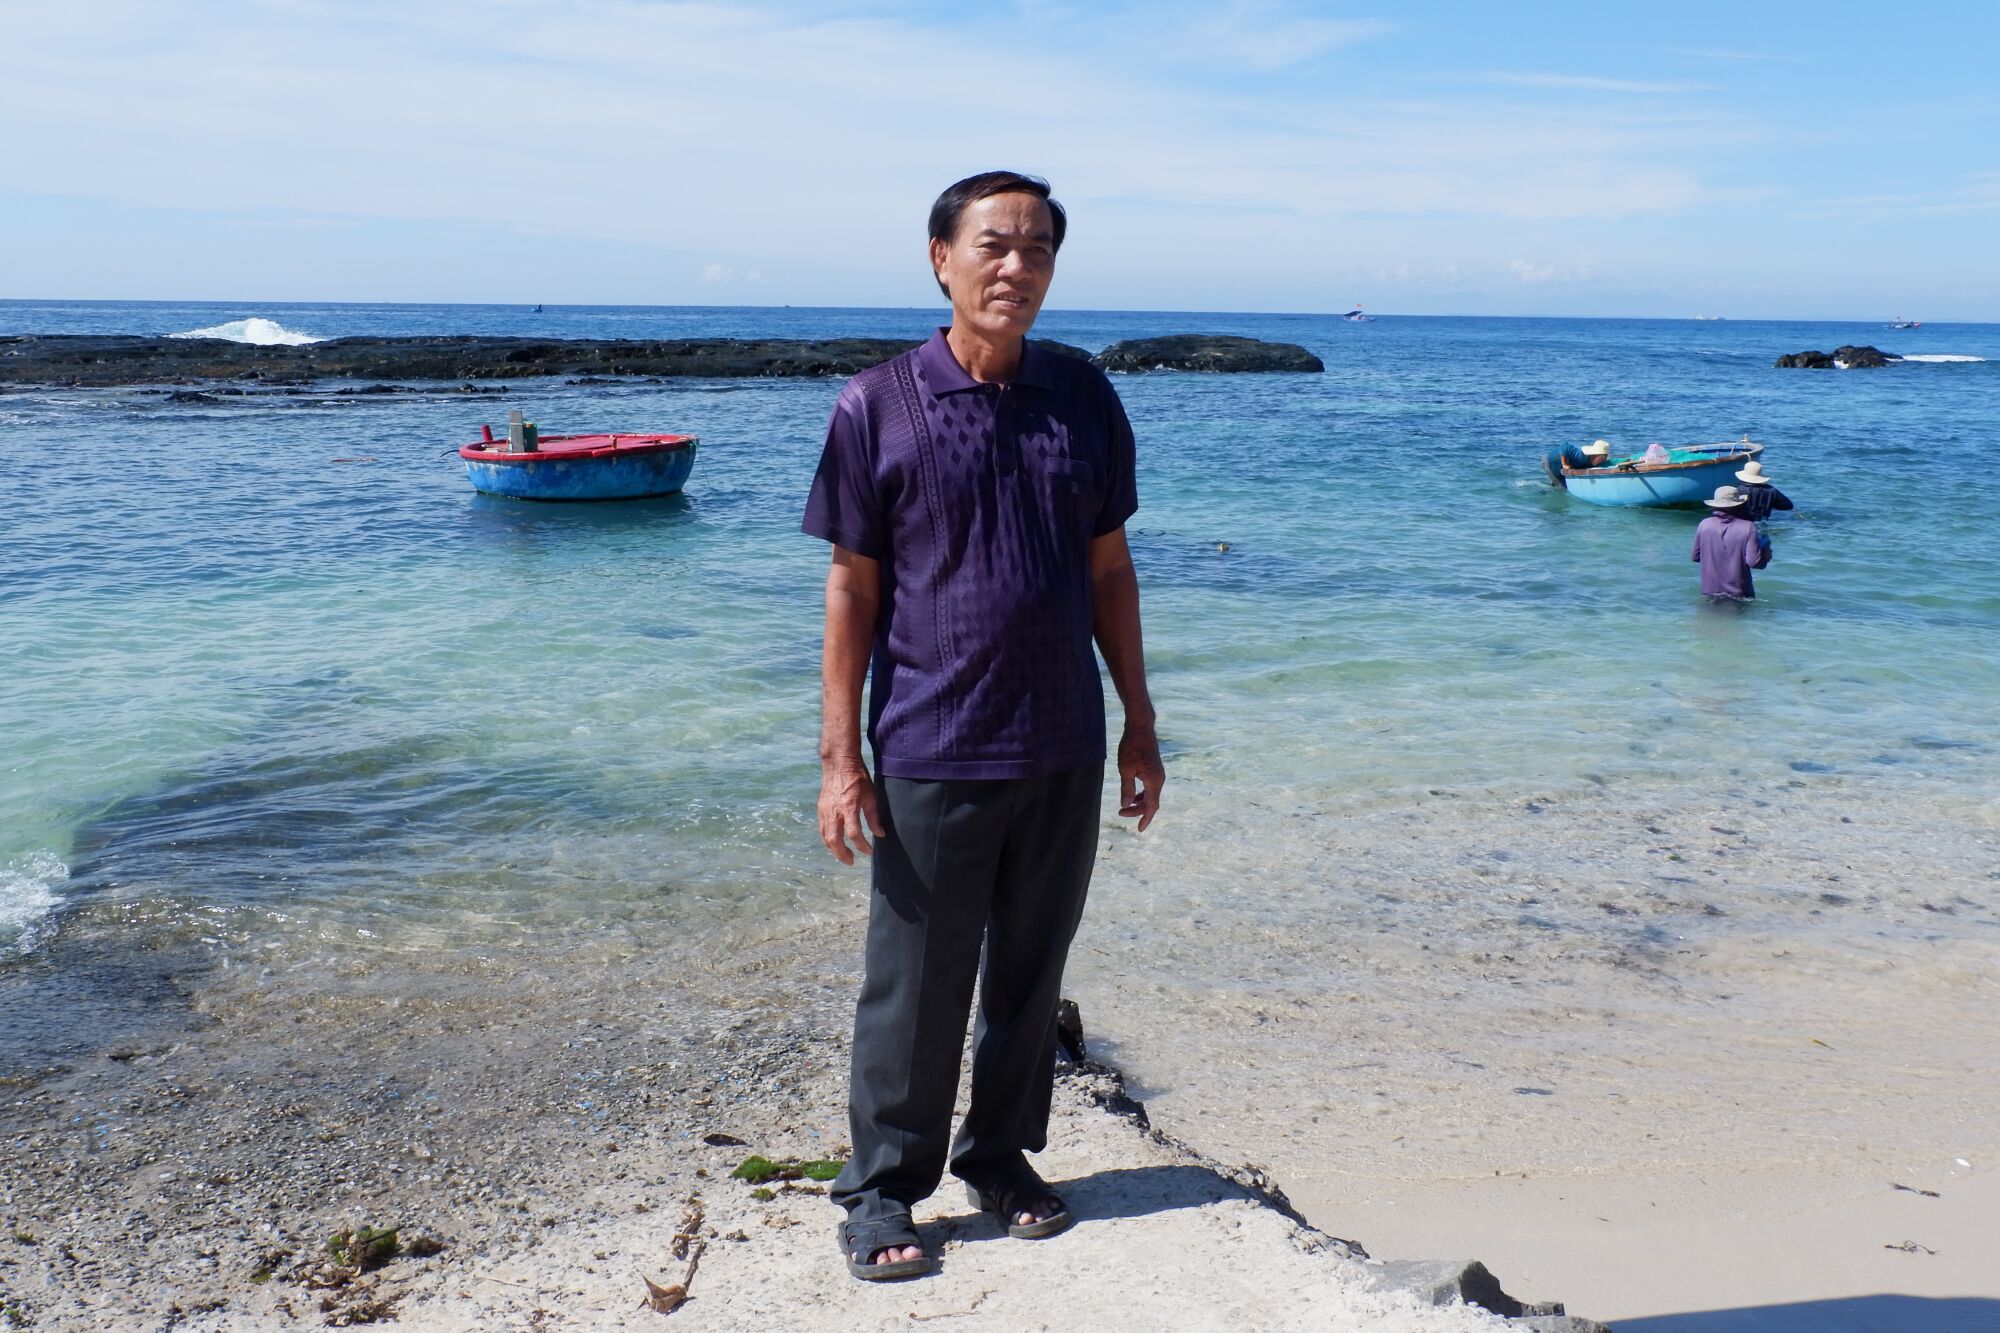 A man stands on the beach in front of a couple of small fishing boats